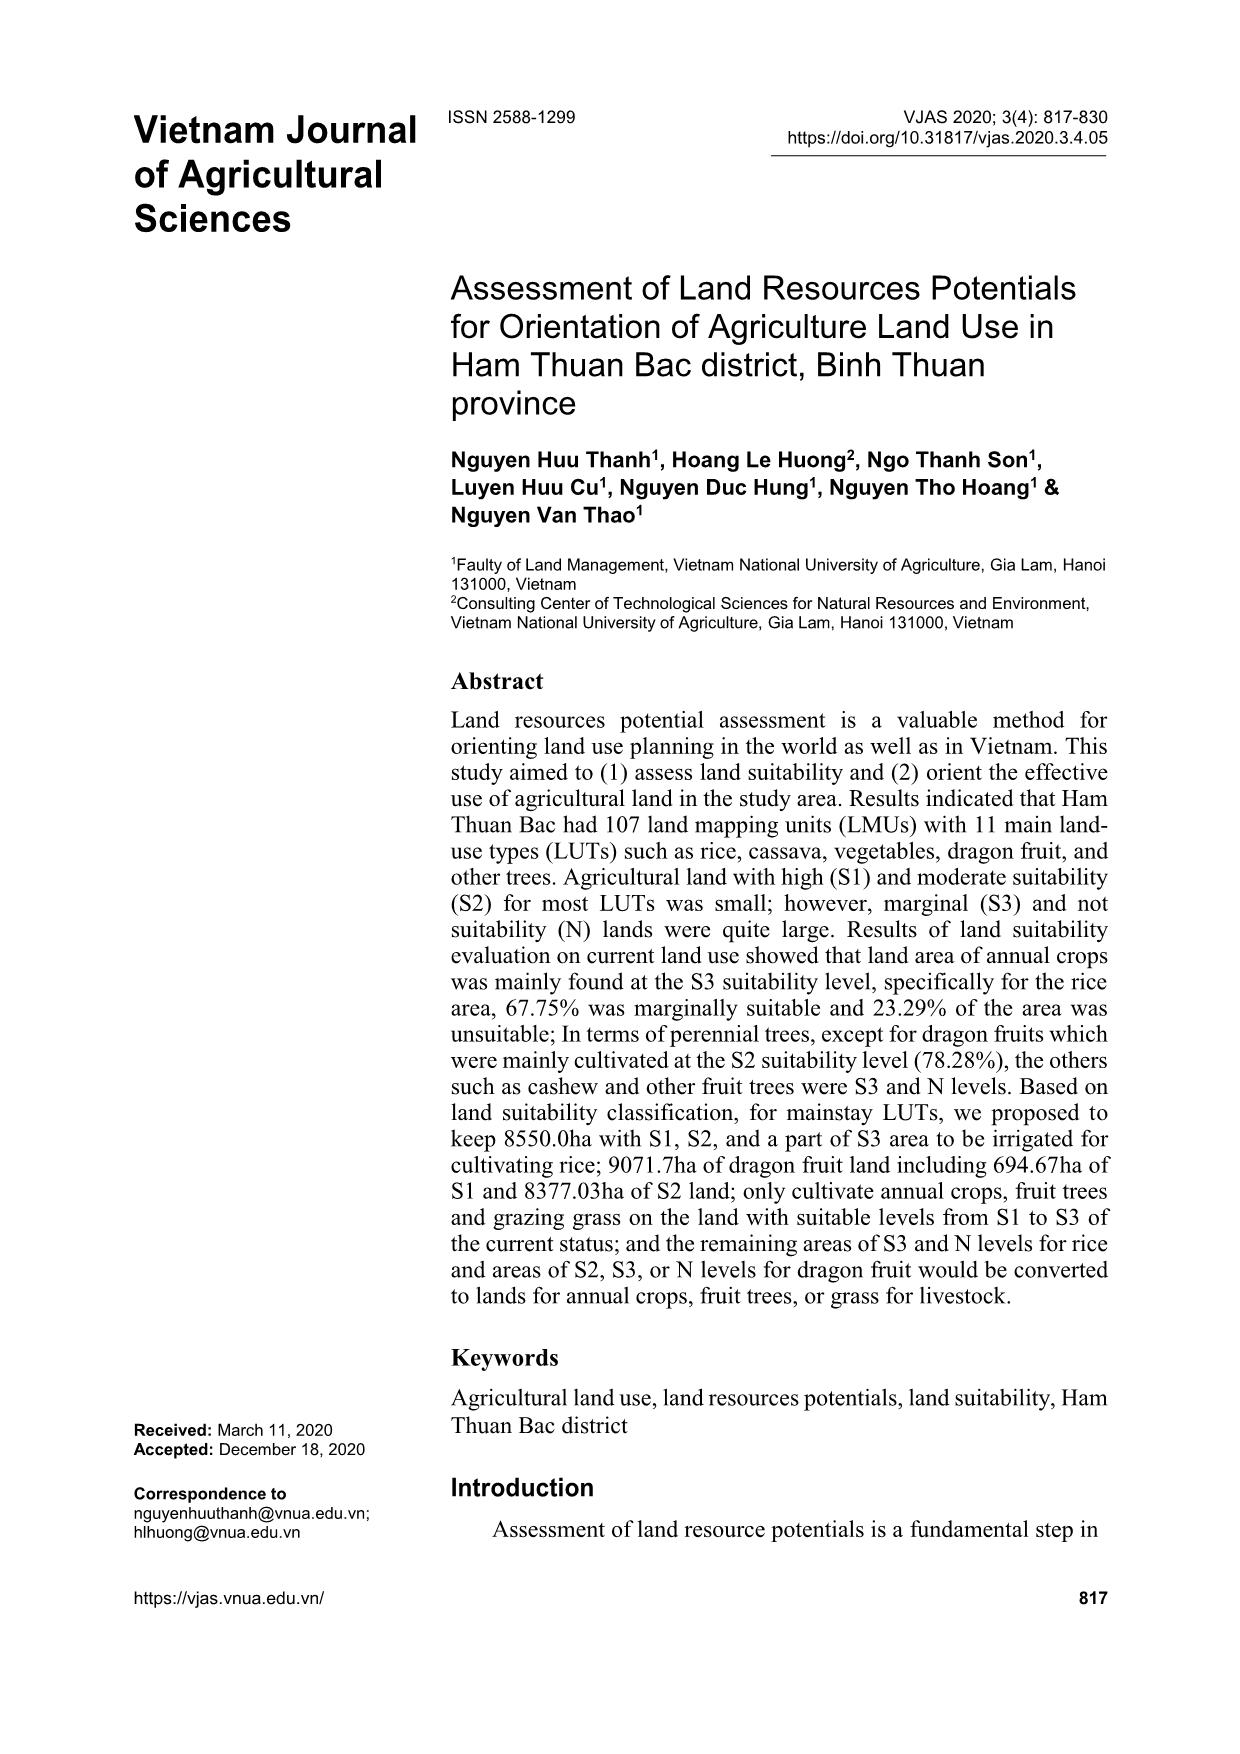 Assessment of Land Resources Potentials for Orientation of Agriculture Land Use in Ham Thuan Bac district, Binh Thuan province trang 1